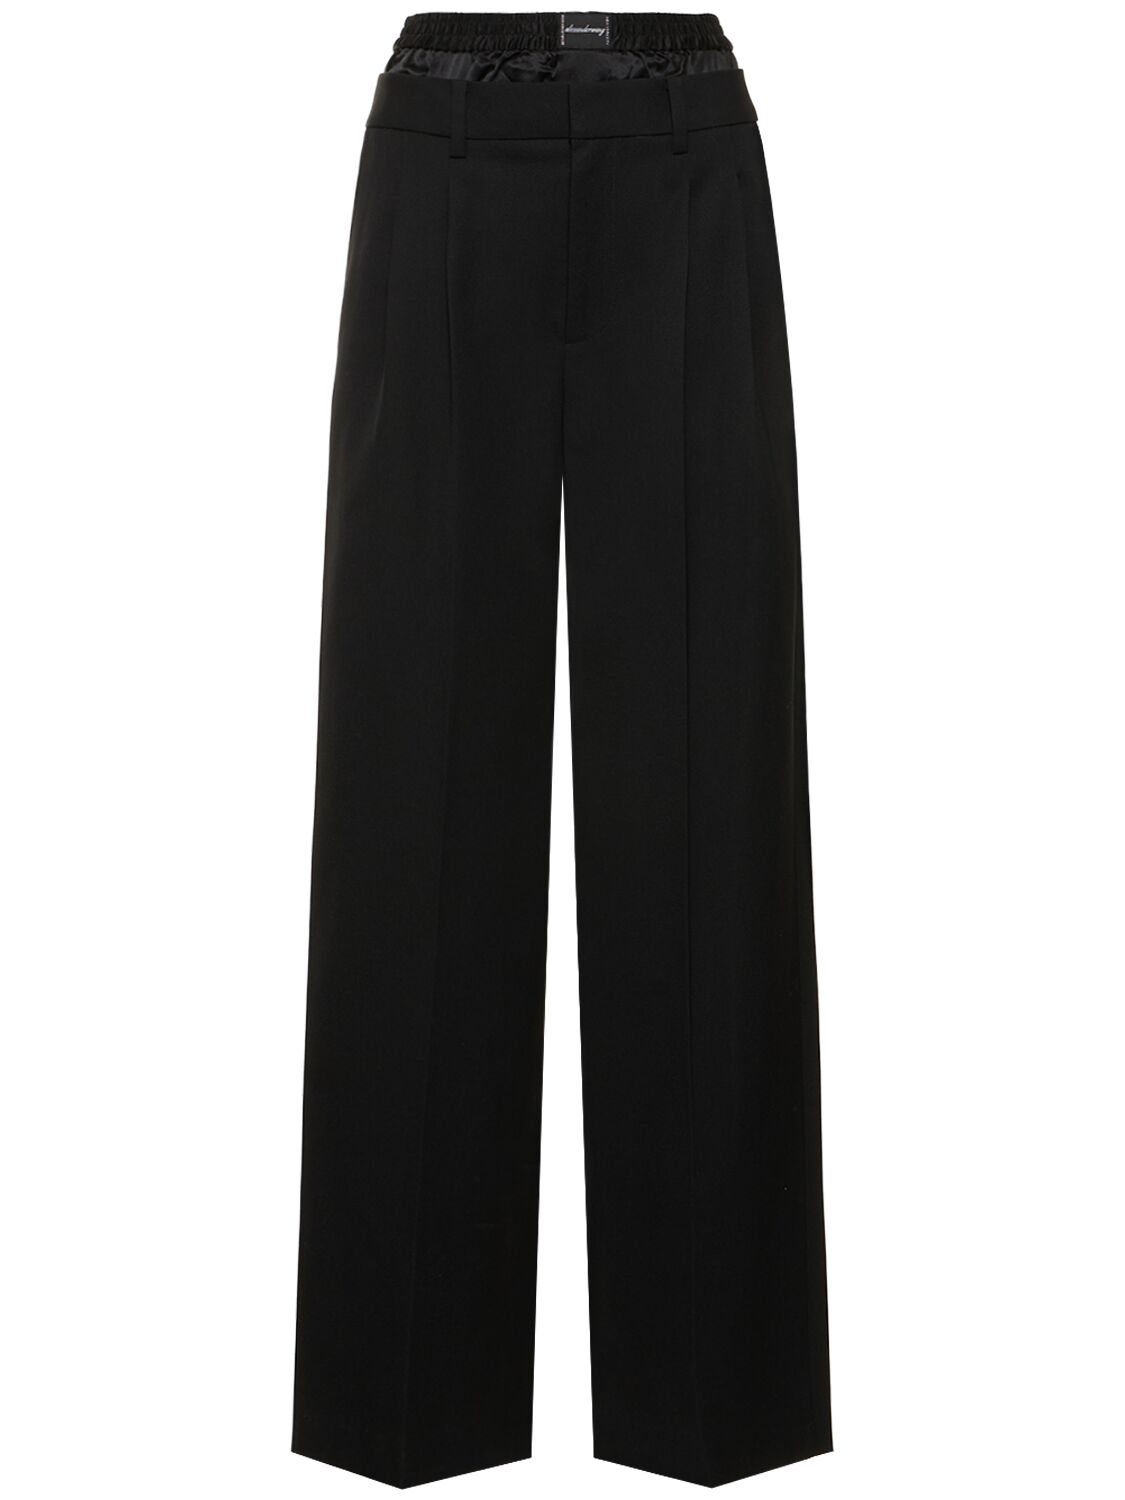 Low Rise Tailored Wool Pants